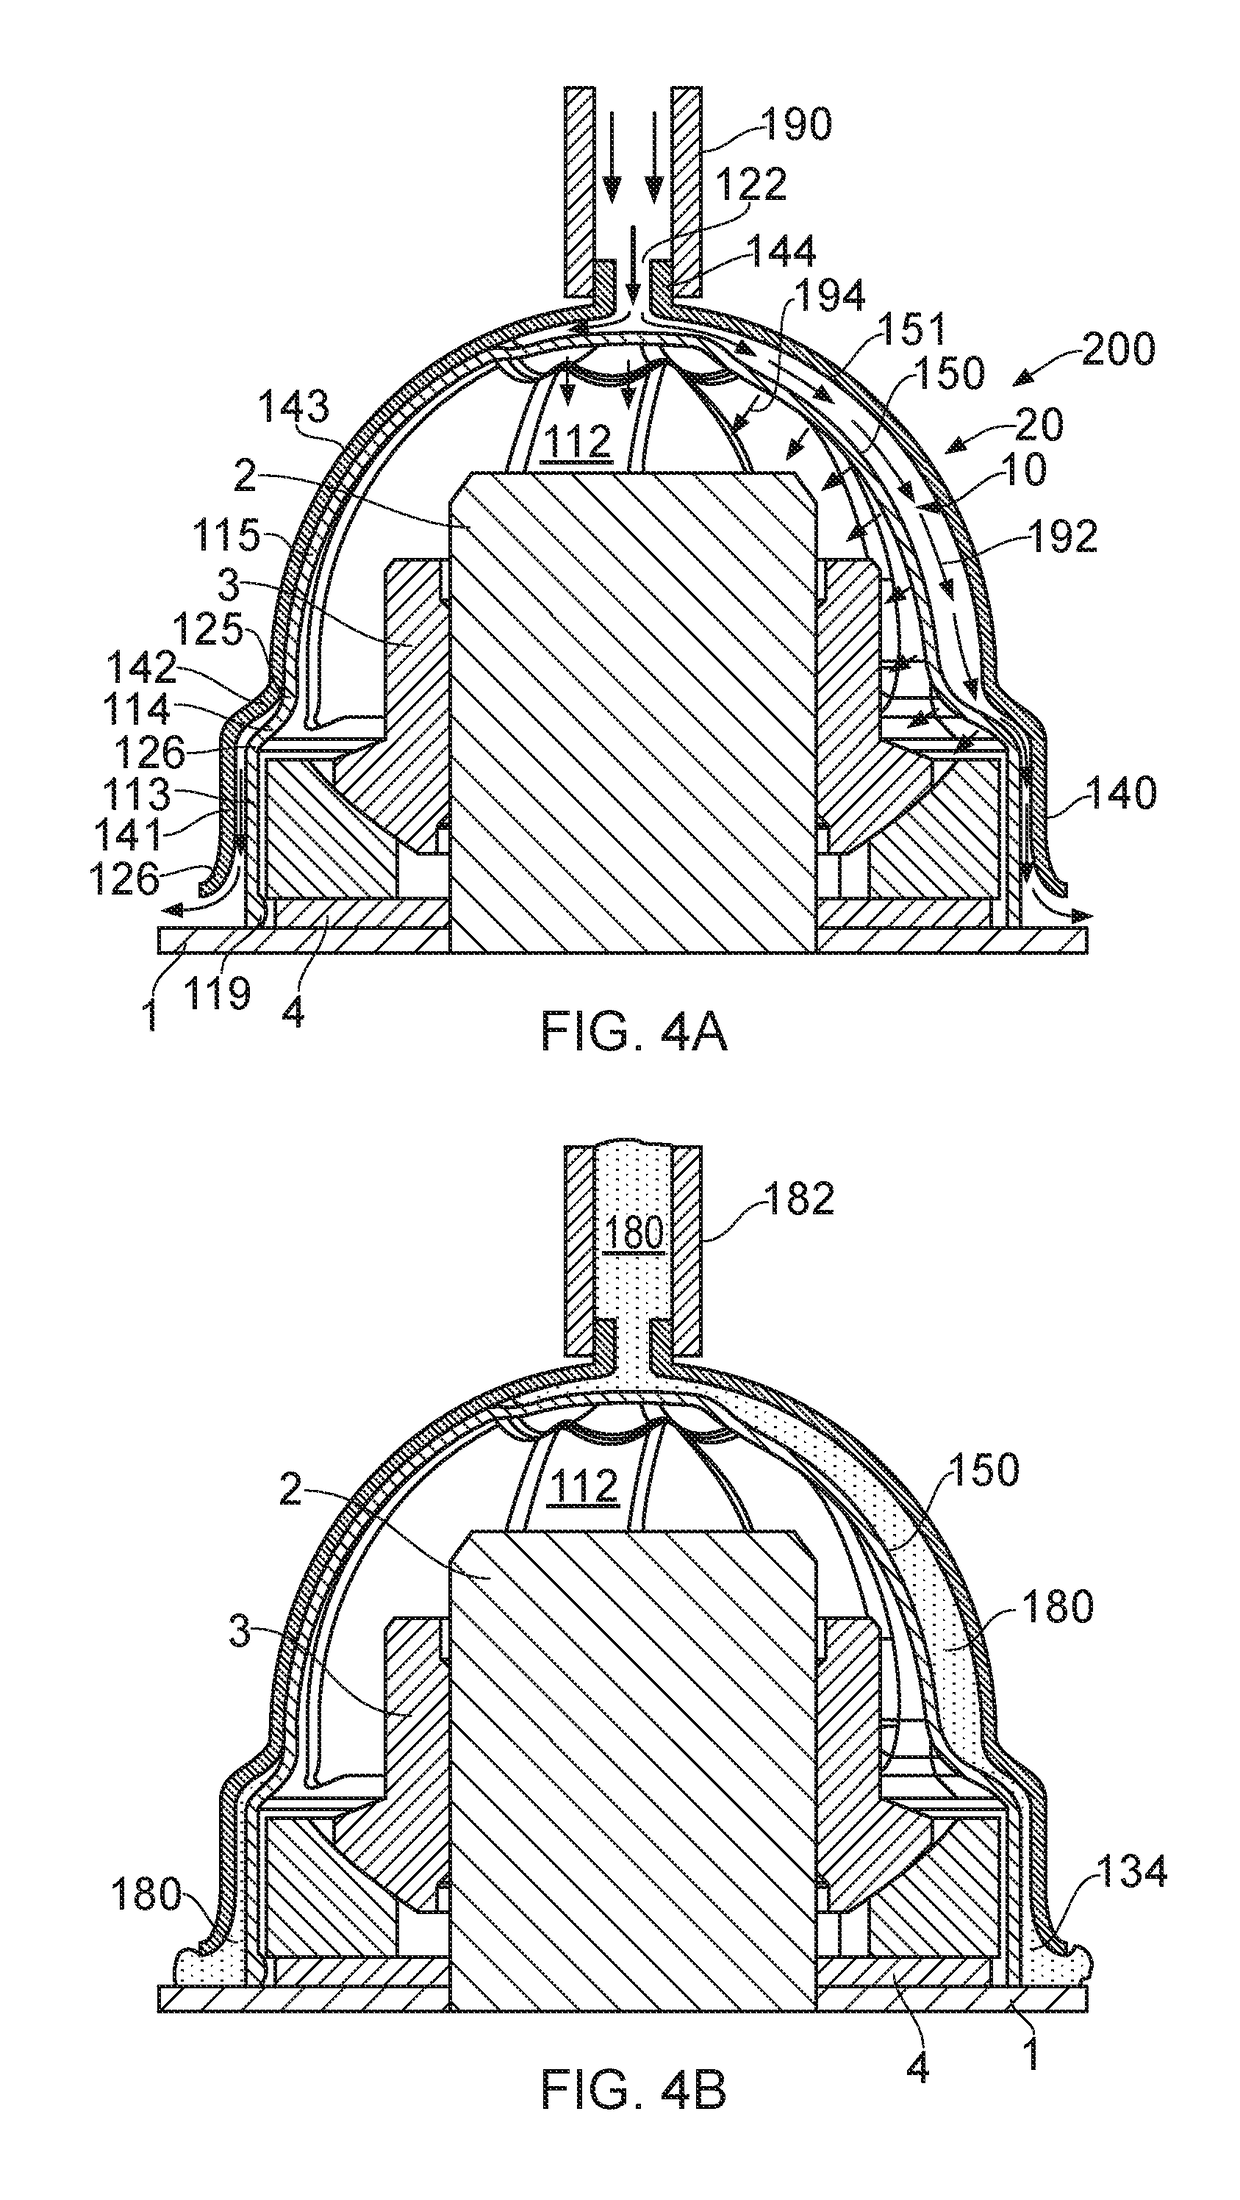 Method of installing a spark containment cap